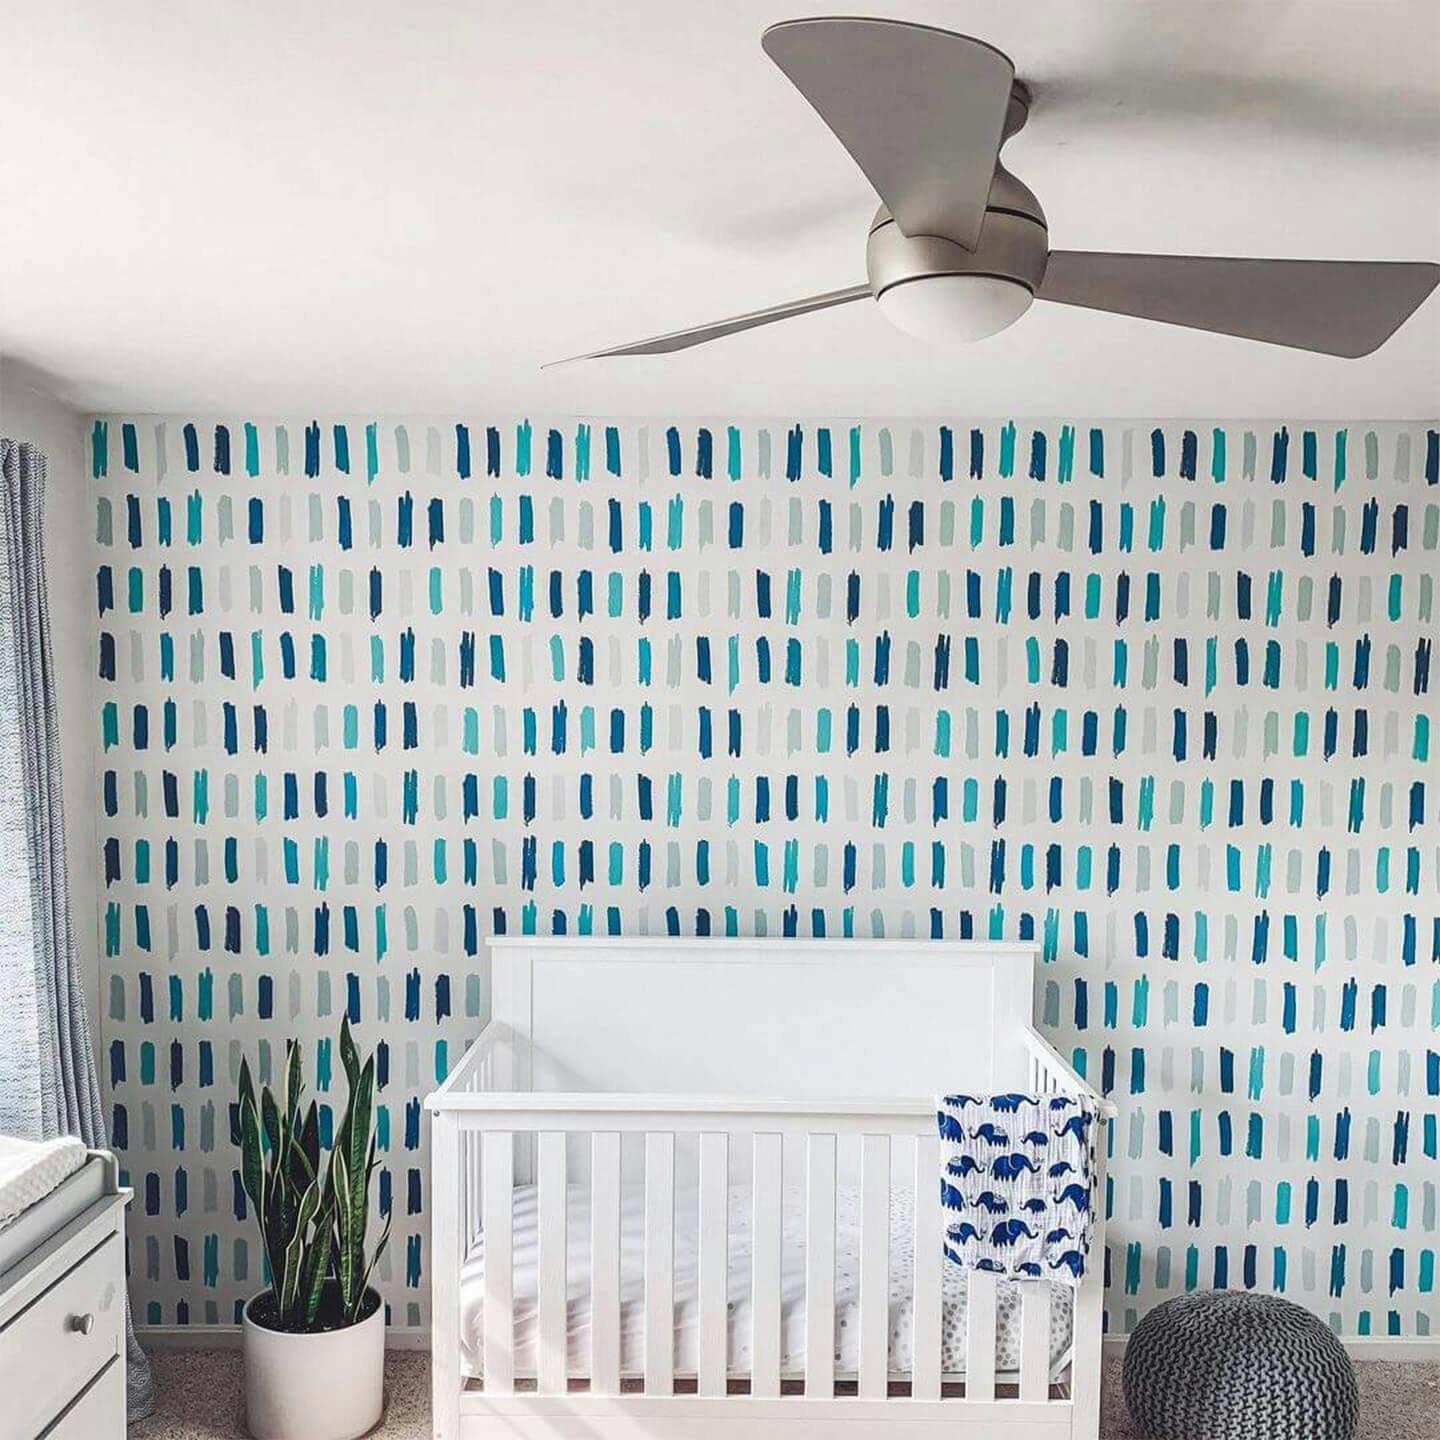 Child's room with Kichler ceiling fan and crib